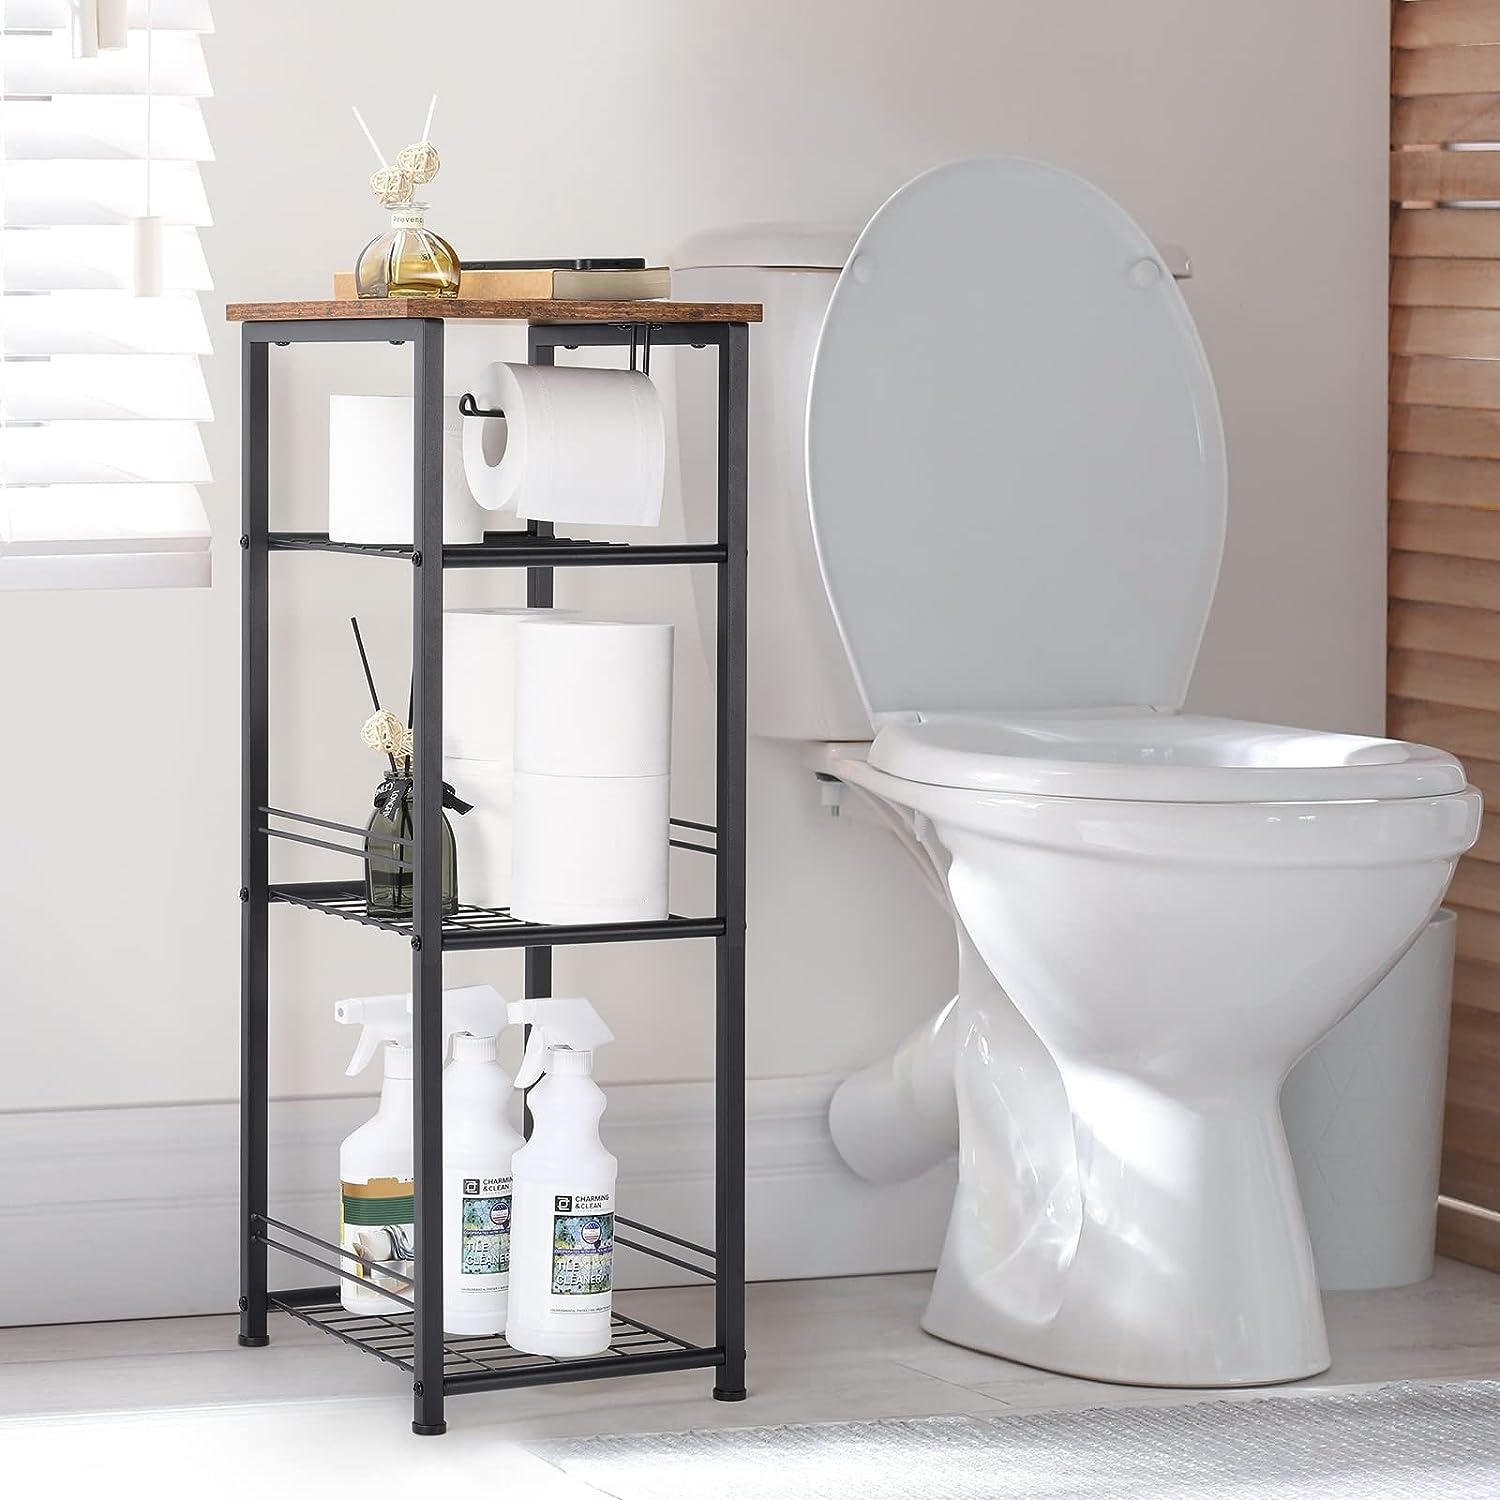 https://ak1.ostkcdn.com/images/products/is/images/direct/811f54bfbc5e8b673f2007f99b3ba7c6b999ff05/4-Tier-Bathroom-Storage-Shelf-with-Toilet-Paper-Holder.jpg